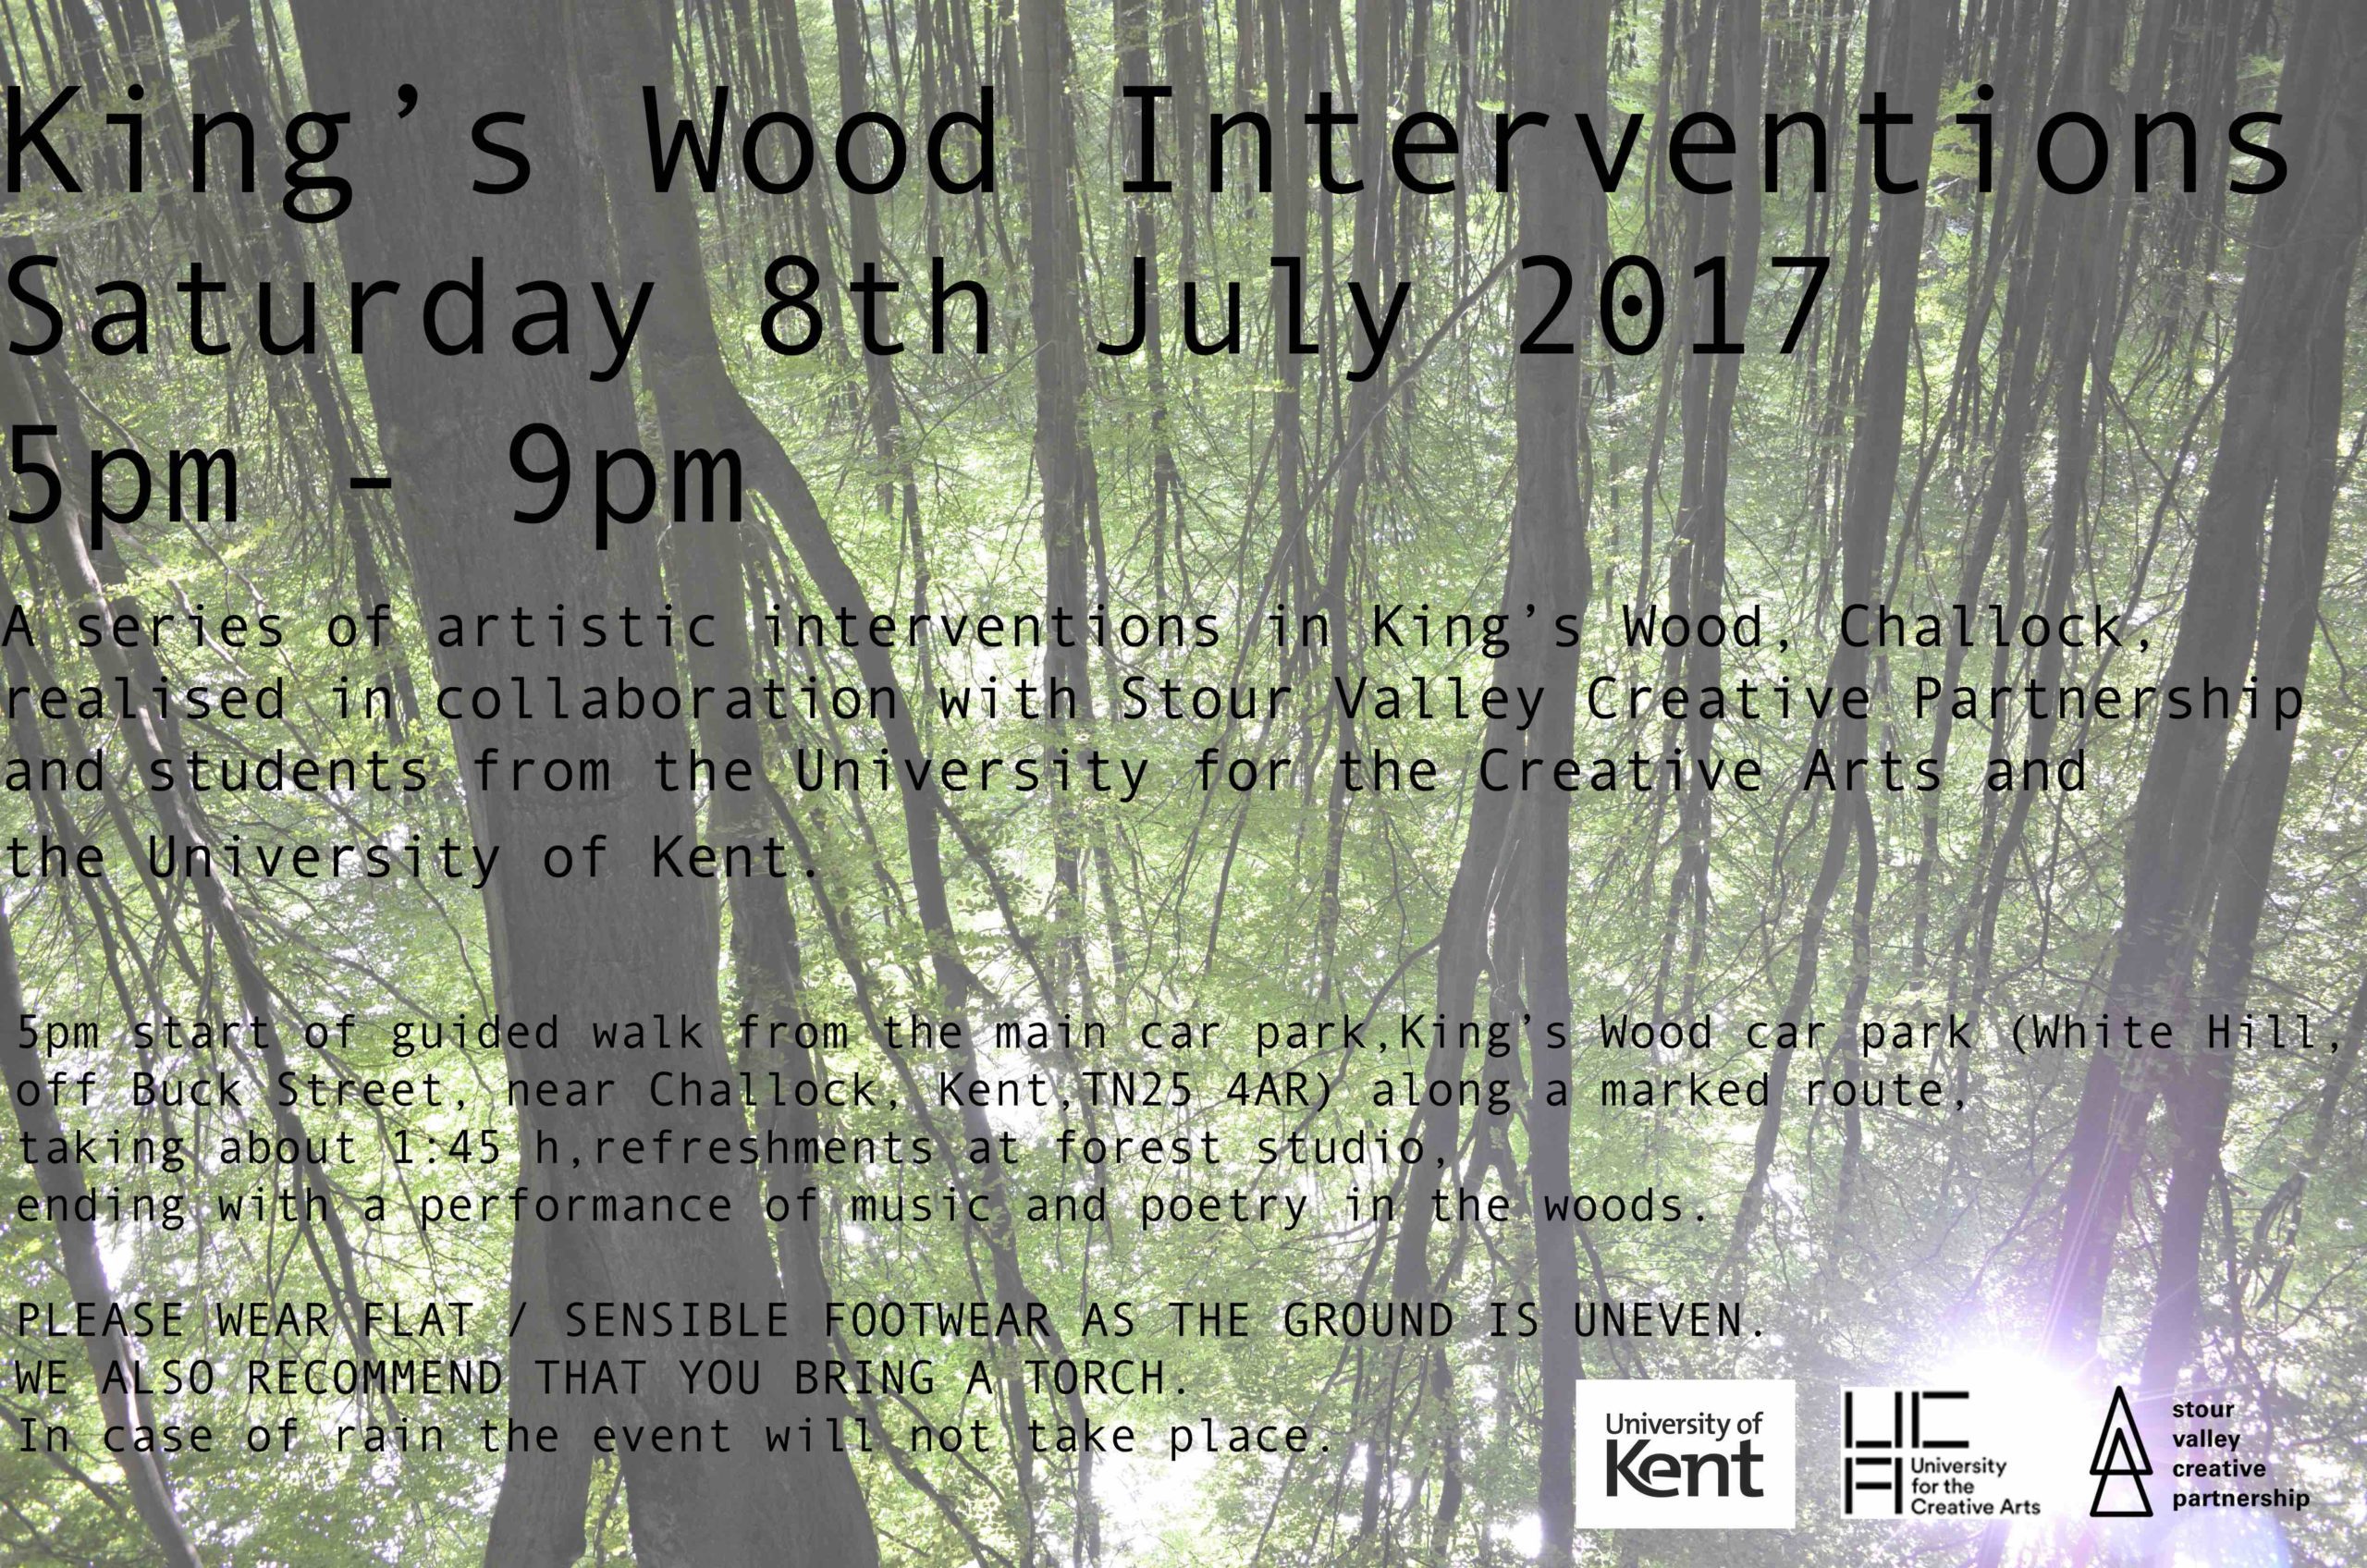 Poster for King's wood event Saturday July 8th 5-9pm